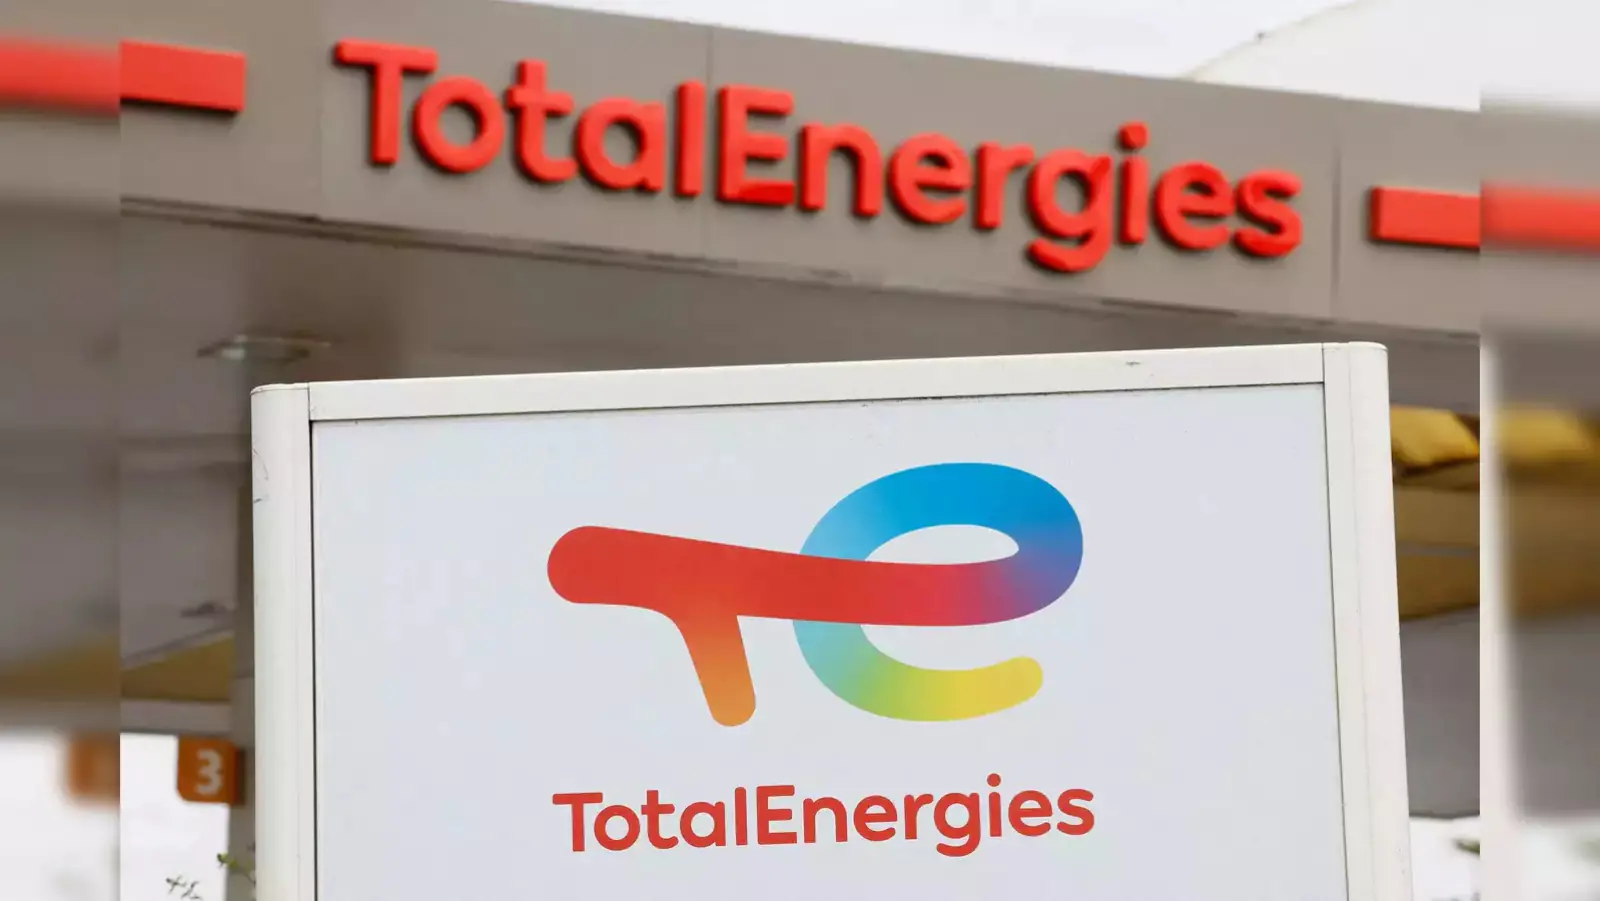 TotalEnergies becomes angel for Adani Green Energy, agreement signed between the two firms